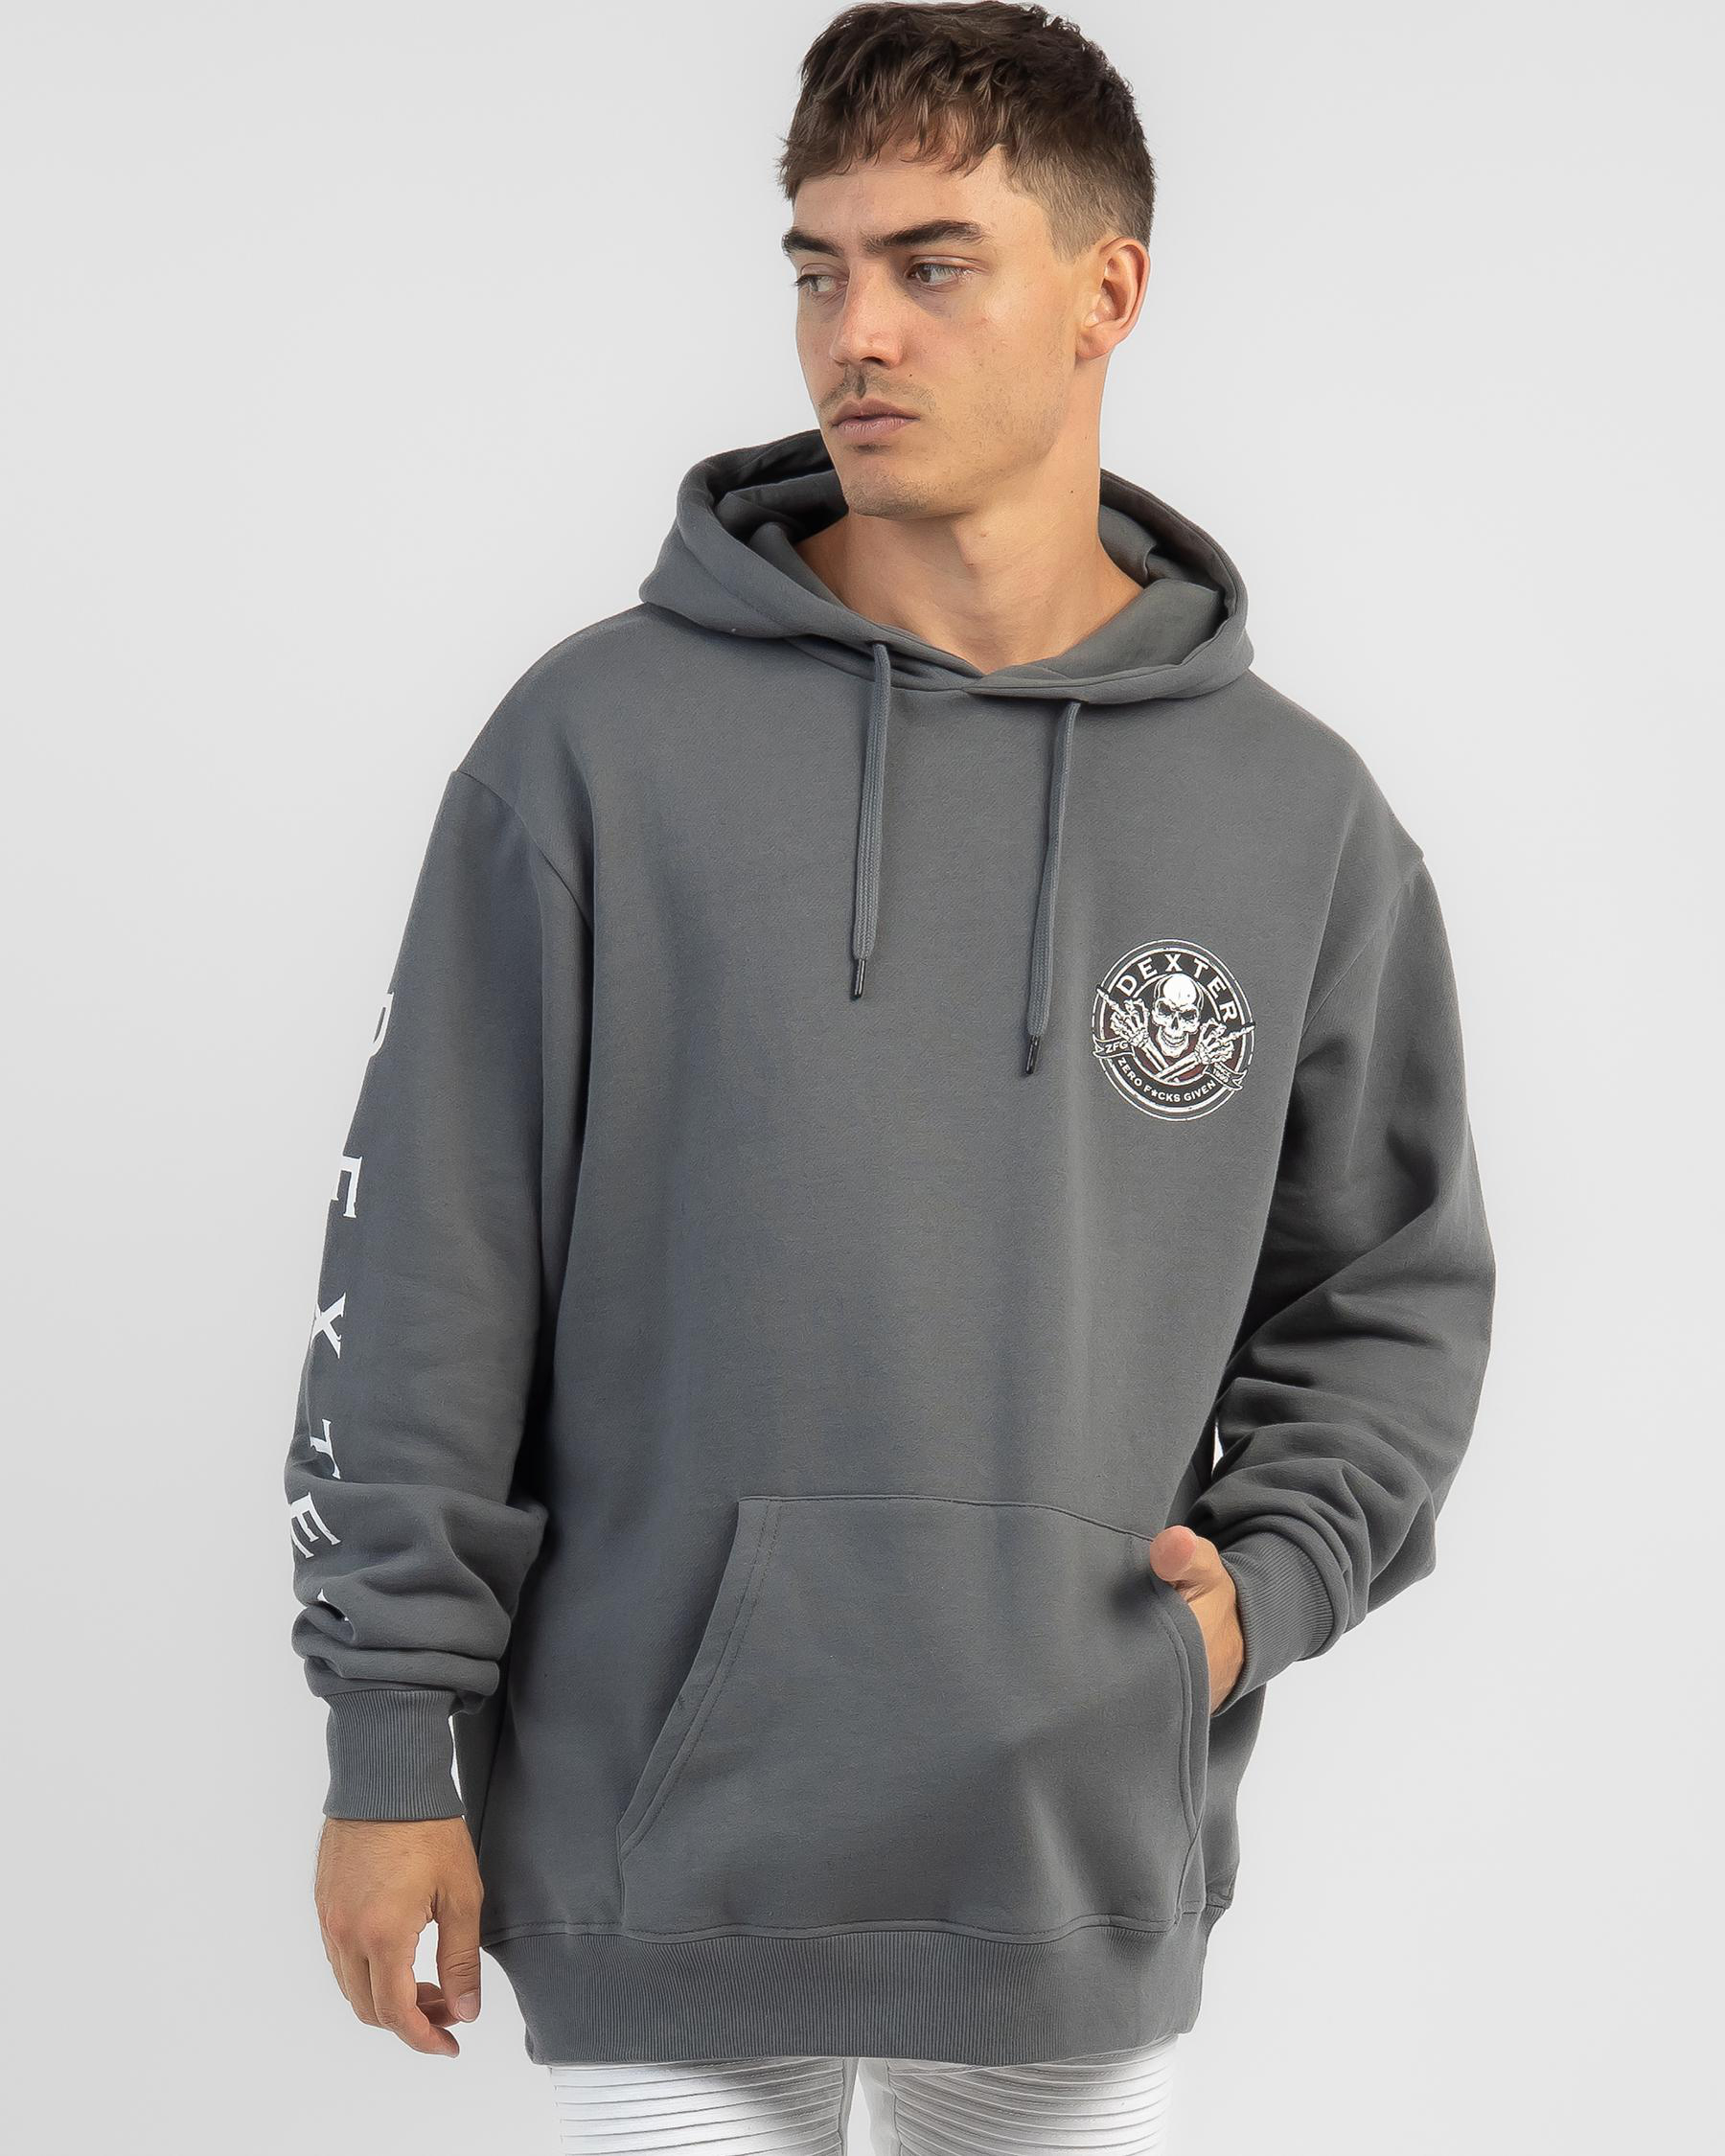 Dexter Zero'd Out Hoodie In Dark Charcoal - Fast Shipping & Easy ...